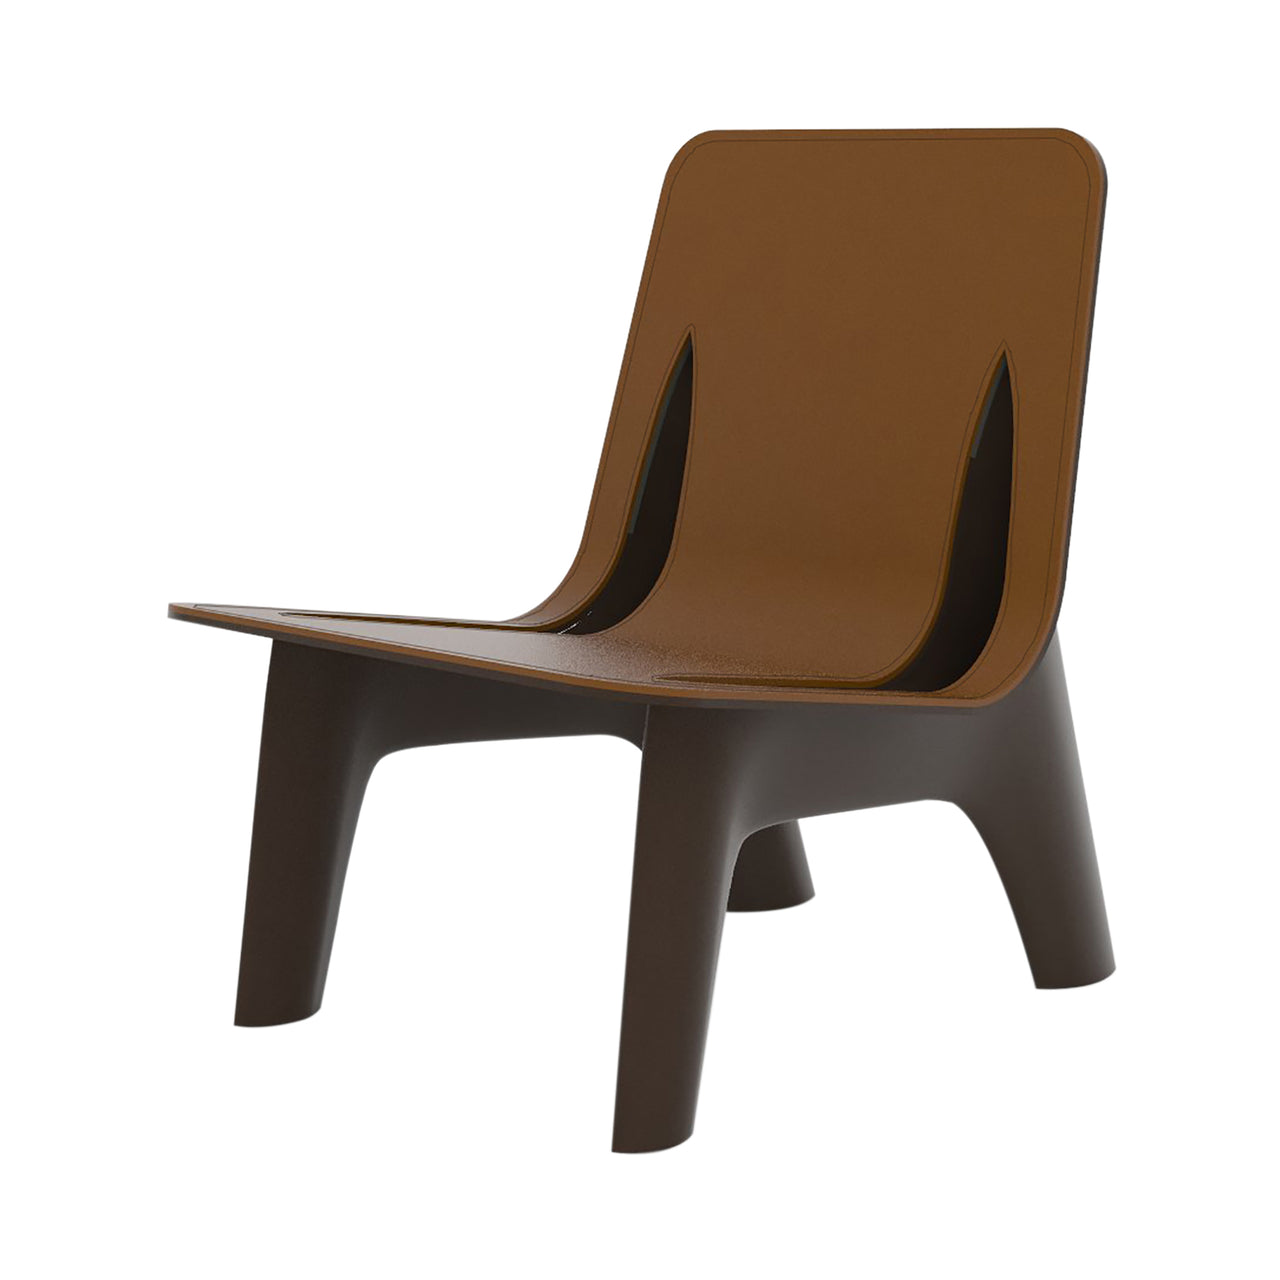 J-Chair Lounge: Leather Seat + Aluminum + Brown + Brown